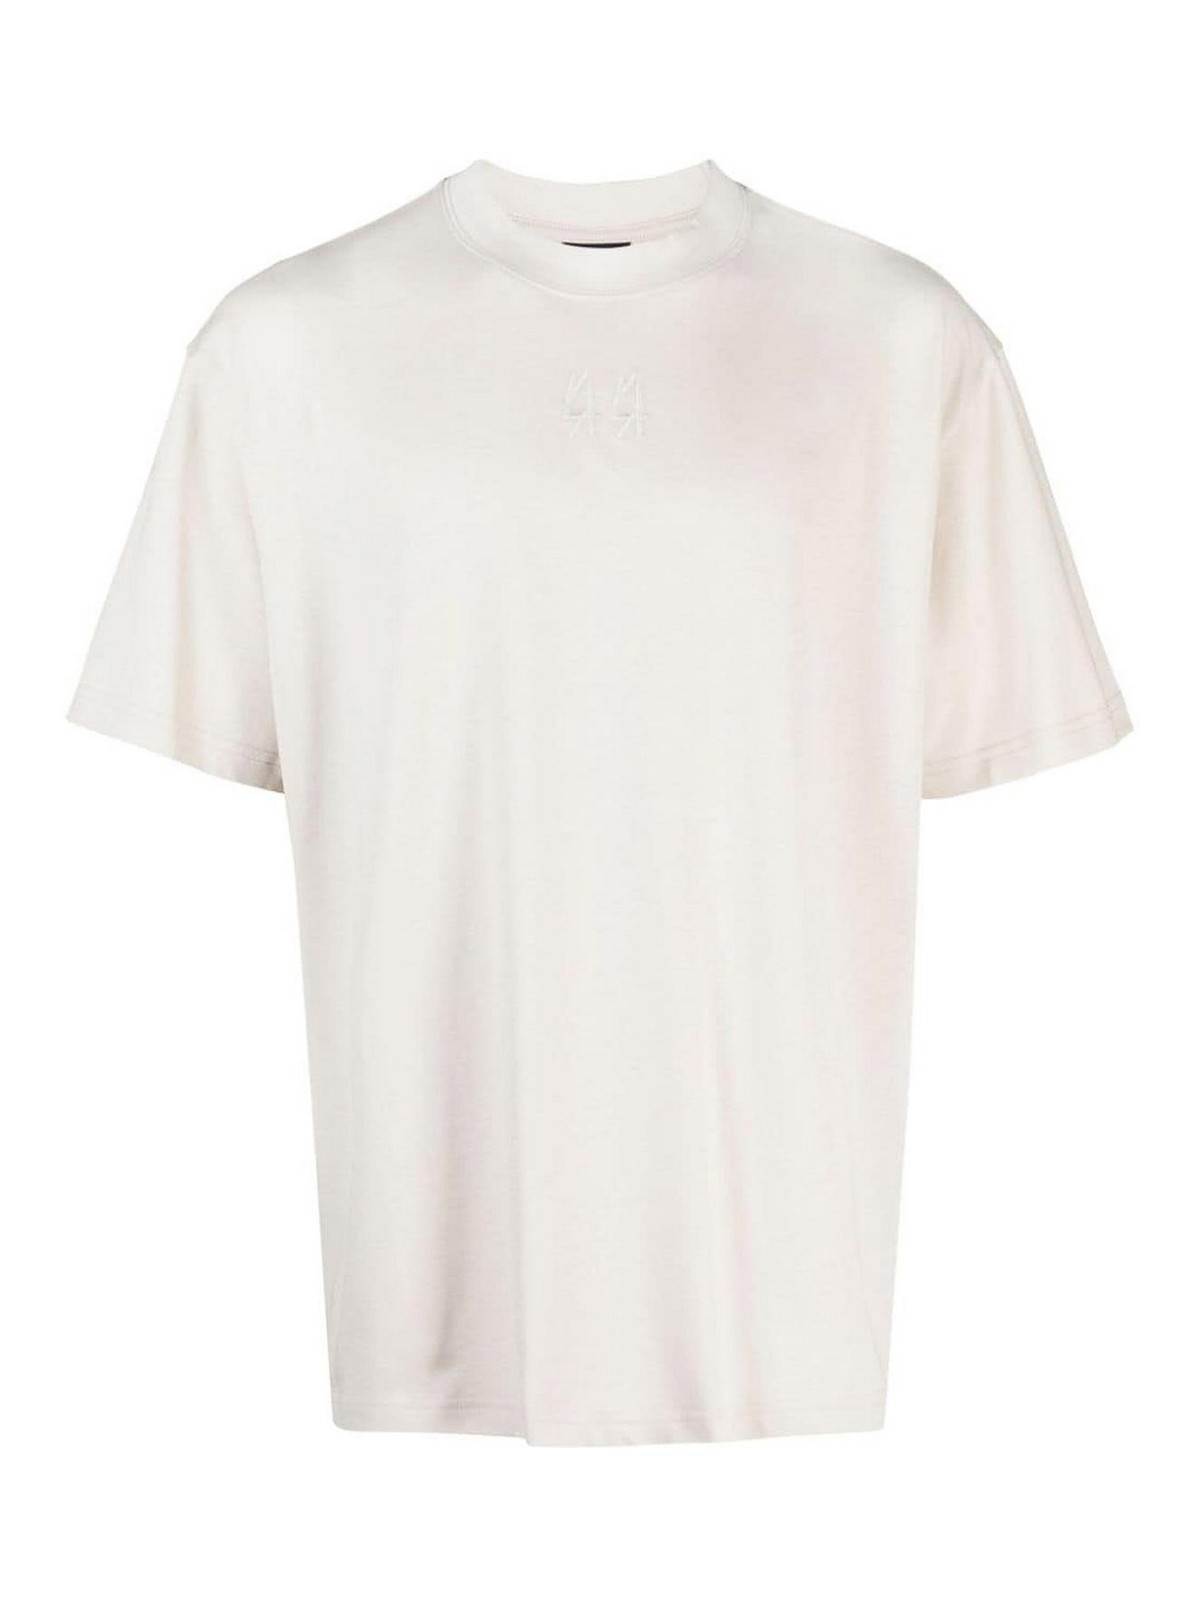 44 Label Group T-shirt In White